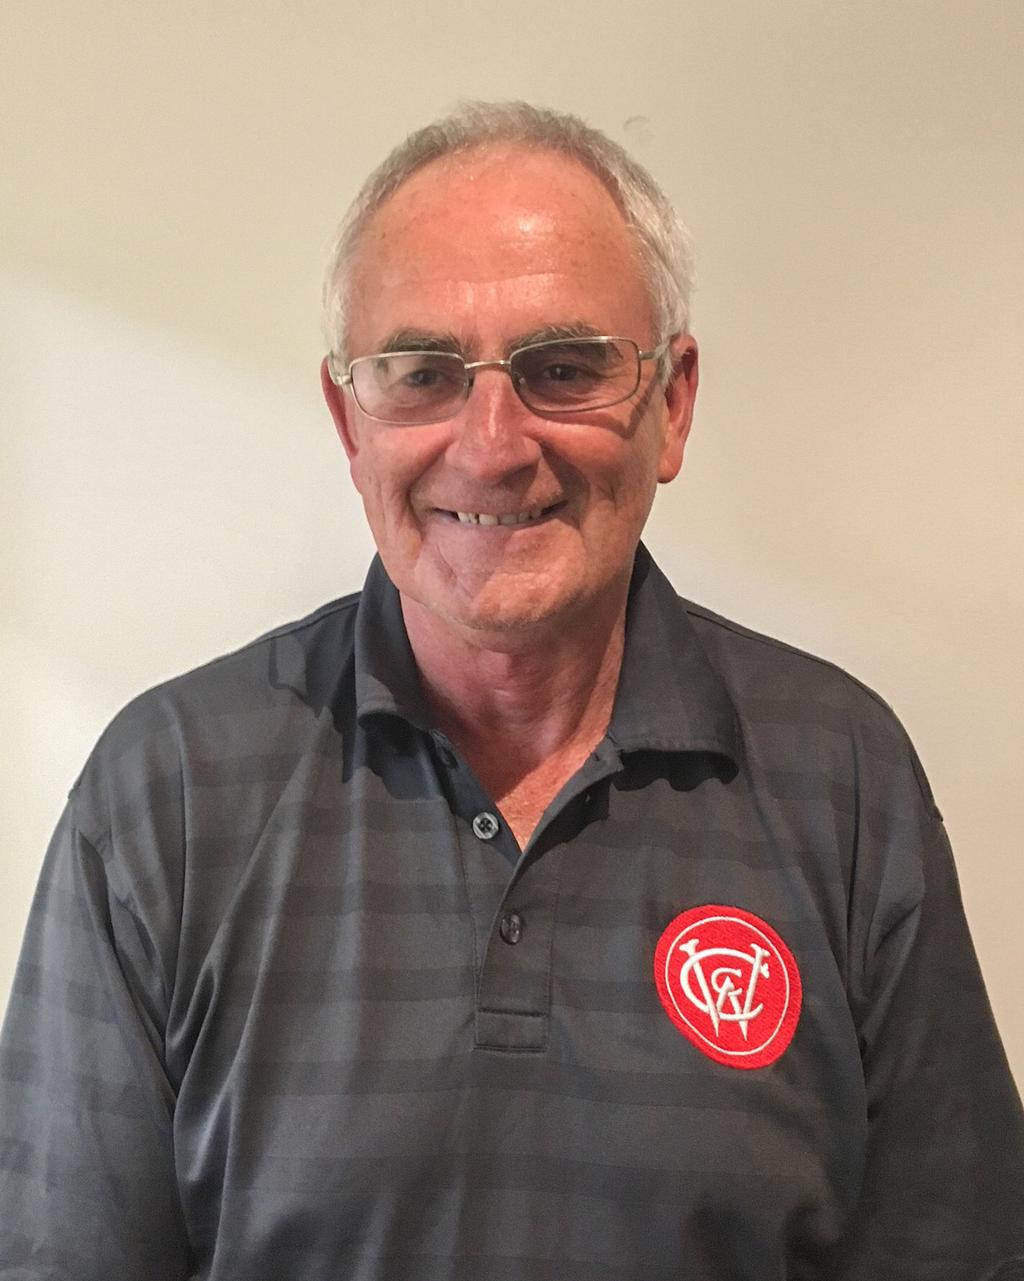 Max, together with vice president Andrew Faull and treasurer John Penhall, provide the club with considerable expertise and management skills, ensuring that our club continues to be a strong and